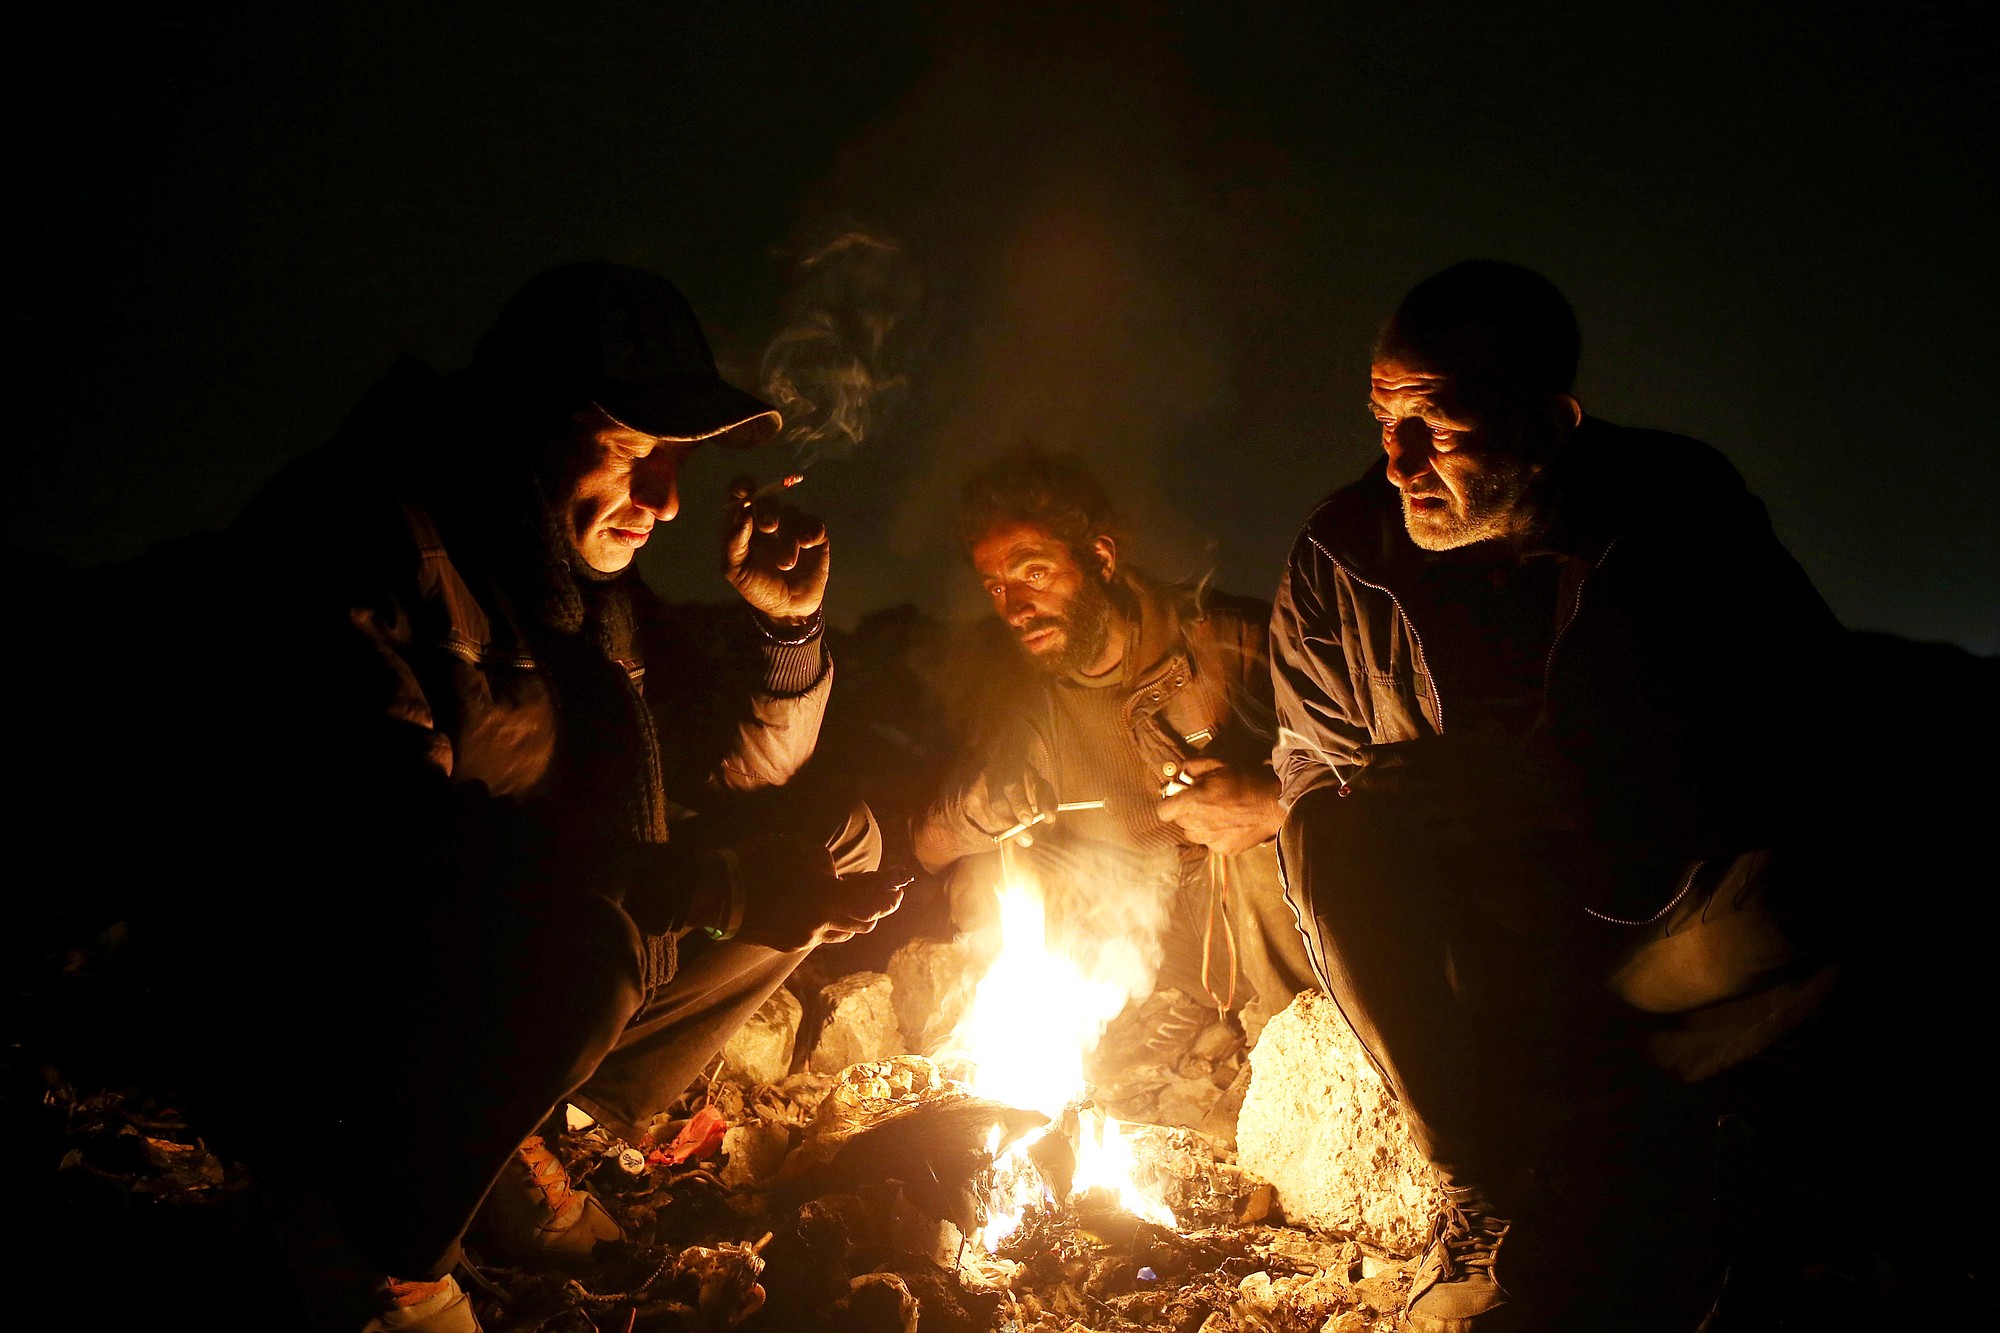 Drug addicts huddle around a fire to warm themselves Wednesday in a suburb of Tehran, Iran.